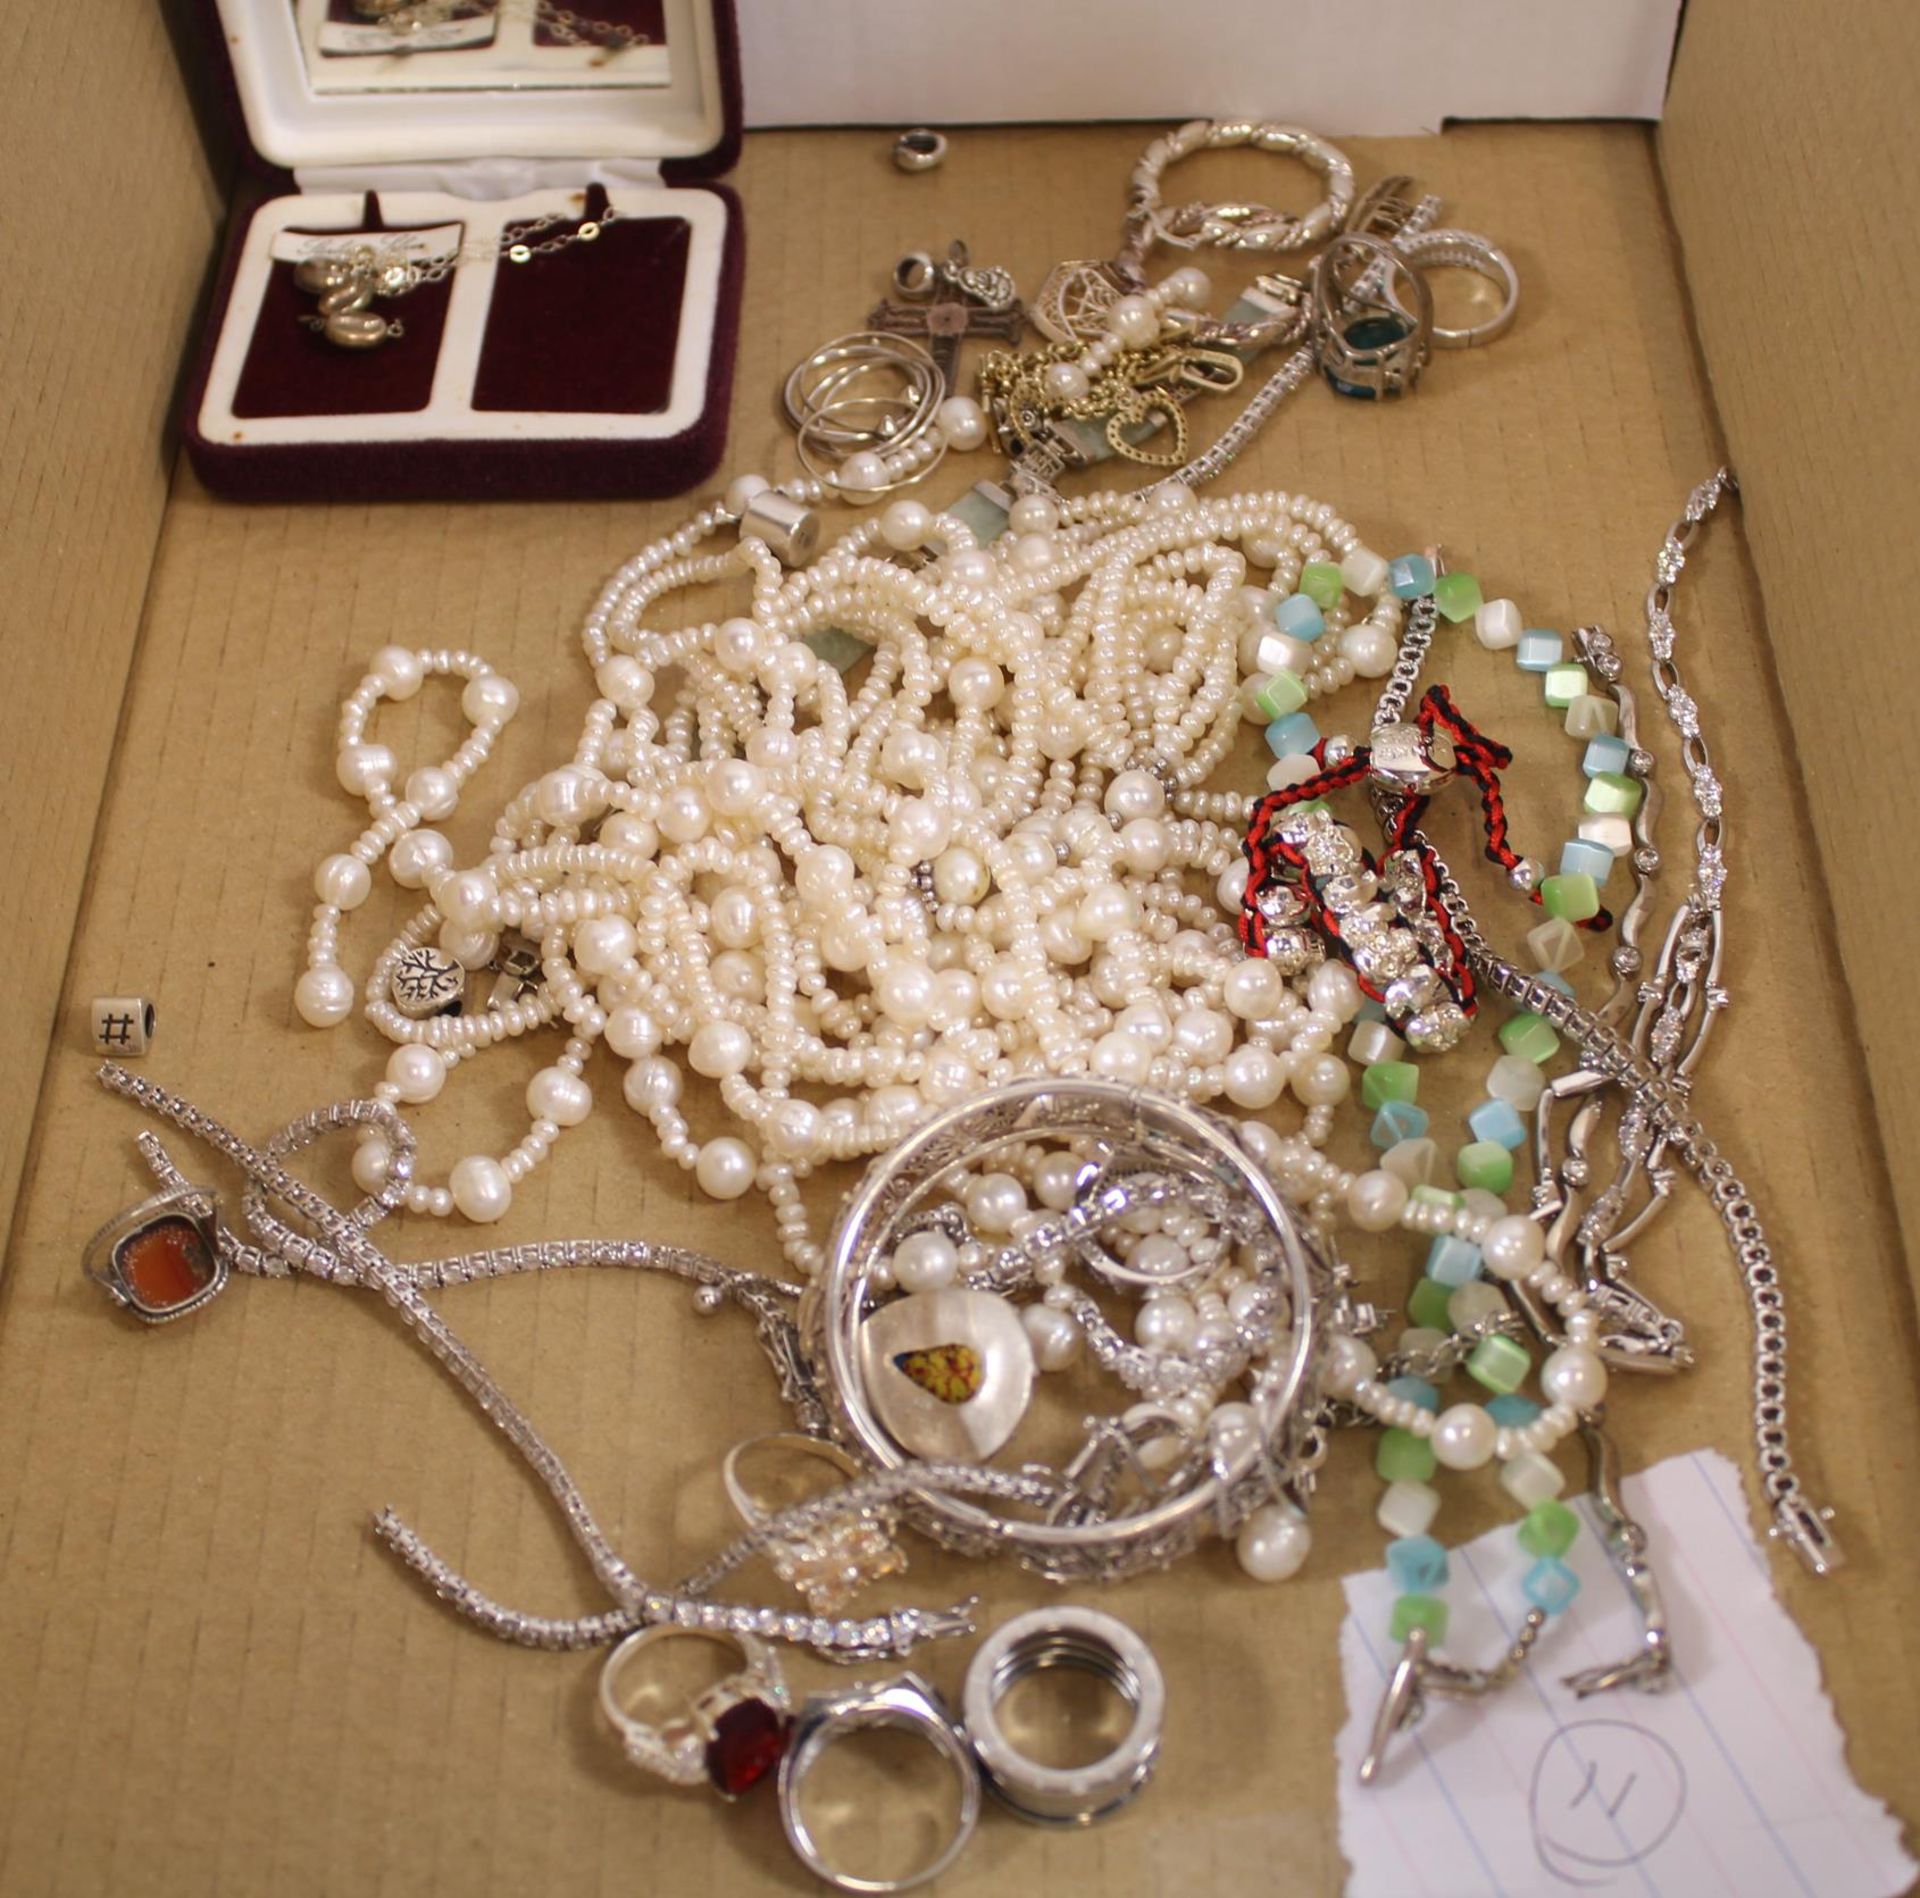 Silver Rings, Earrings, Charms etc., Necklaces marked Dior, Tateossian Links of London etc. and a - Image 2 of 2